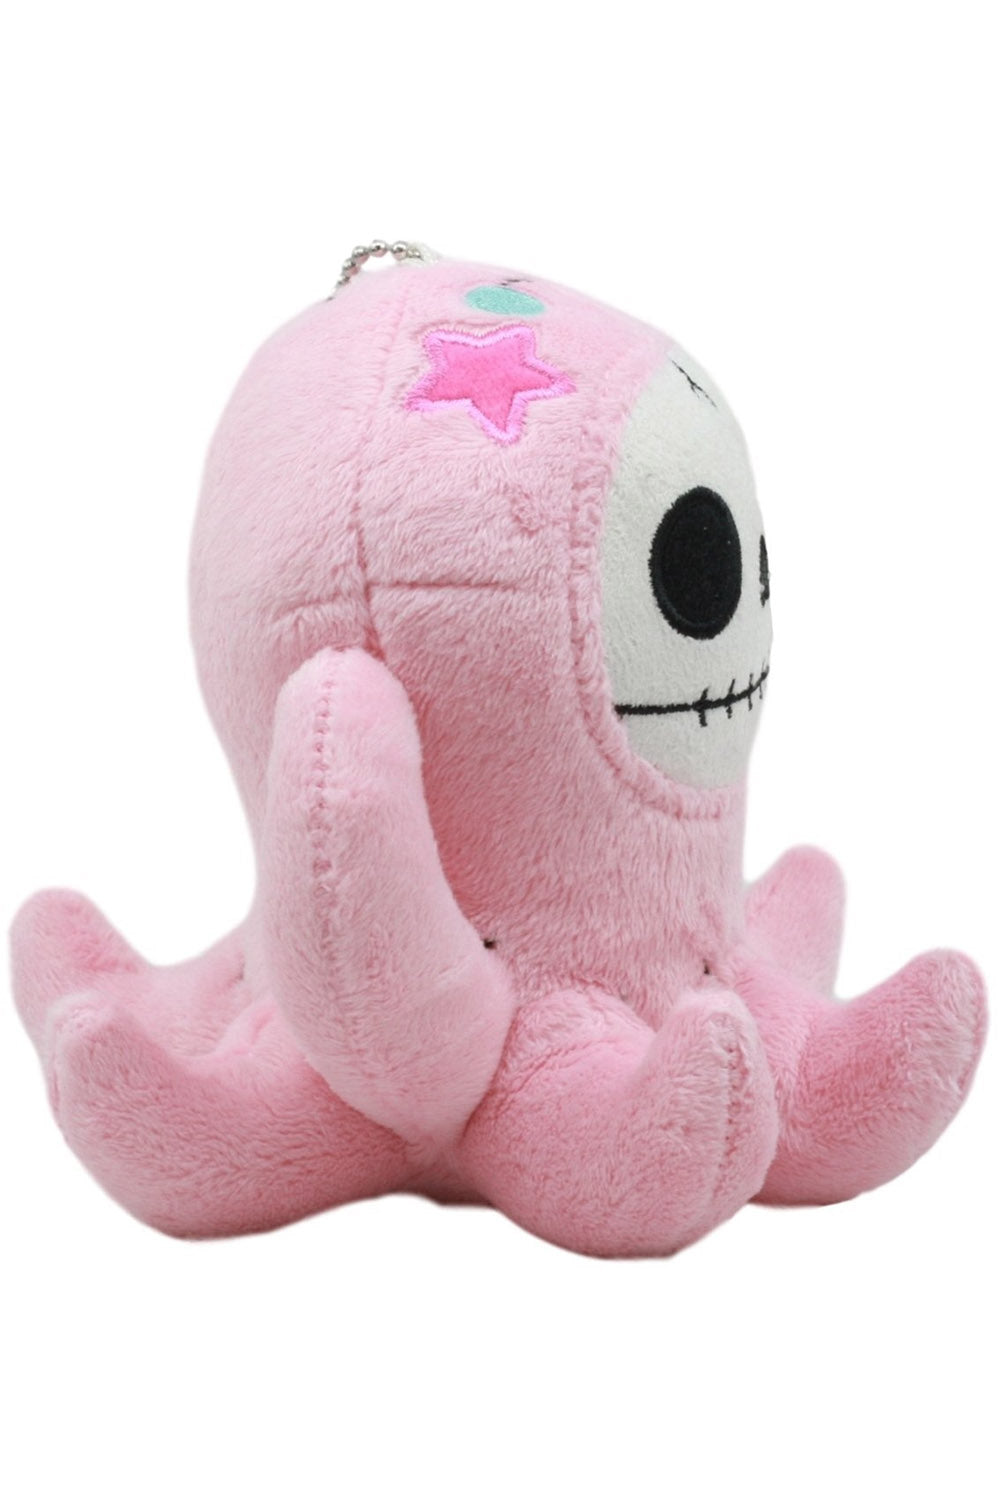 Octopee the Octopus Plush [Small]